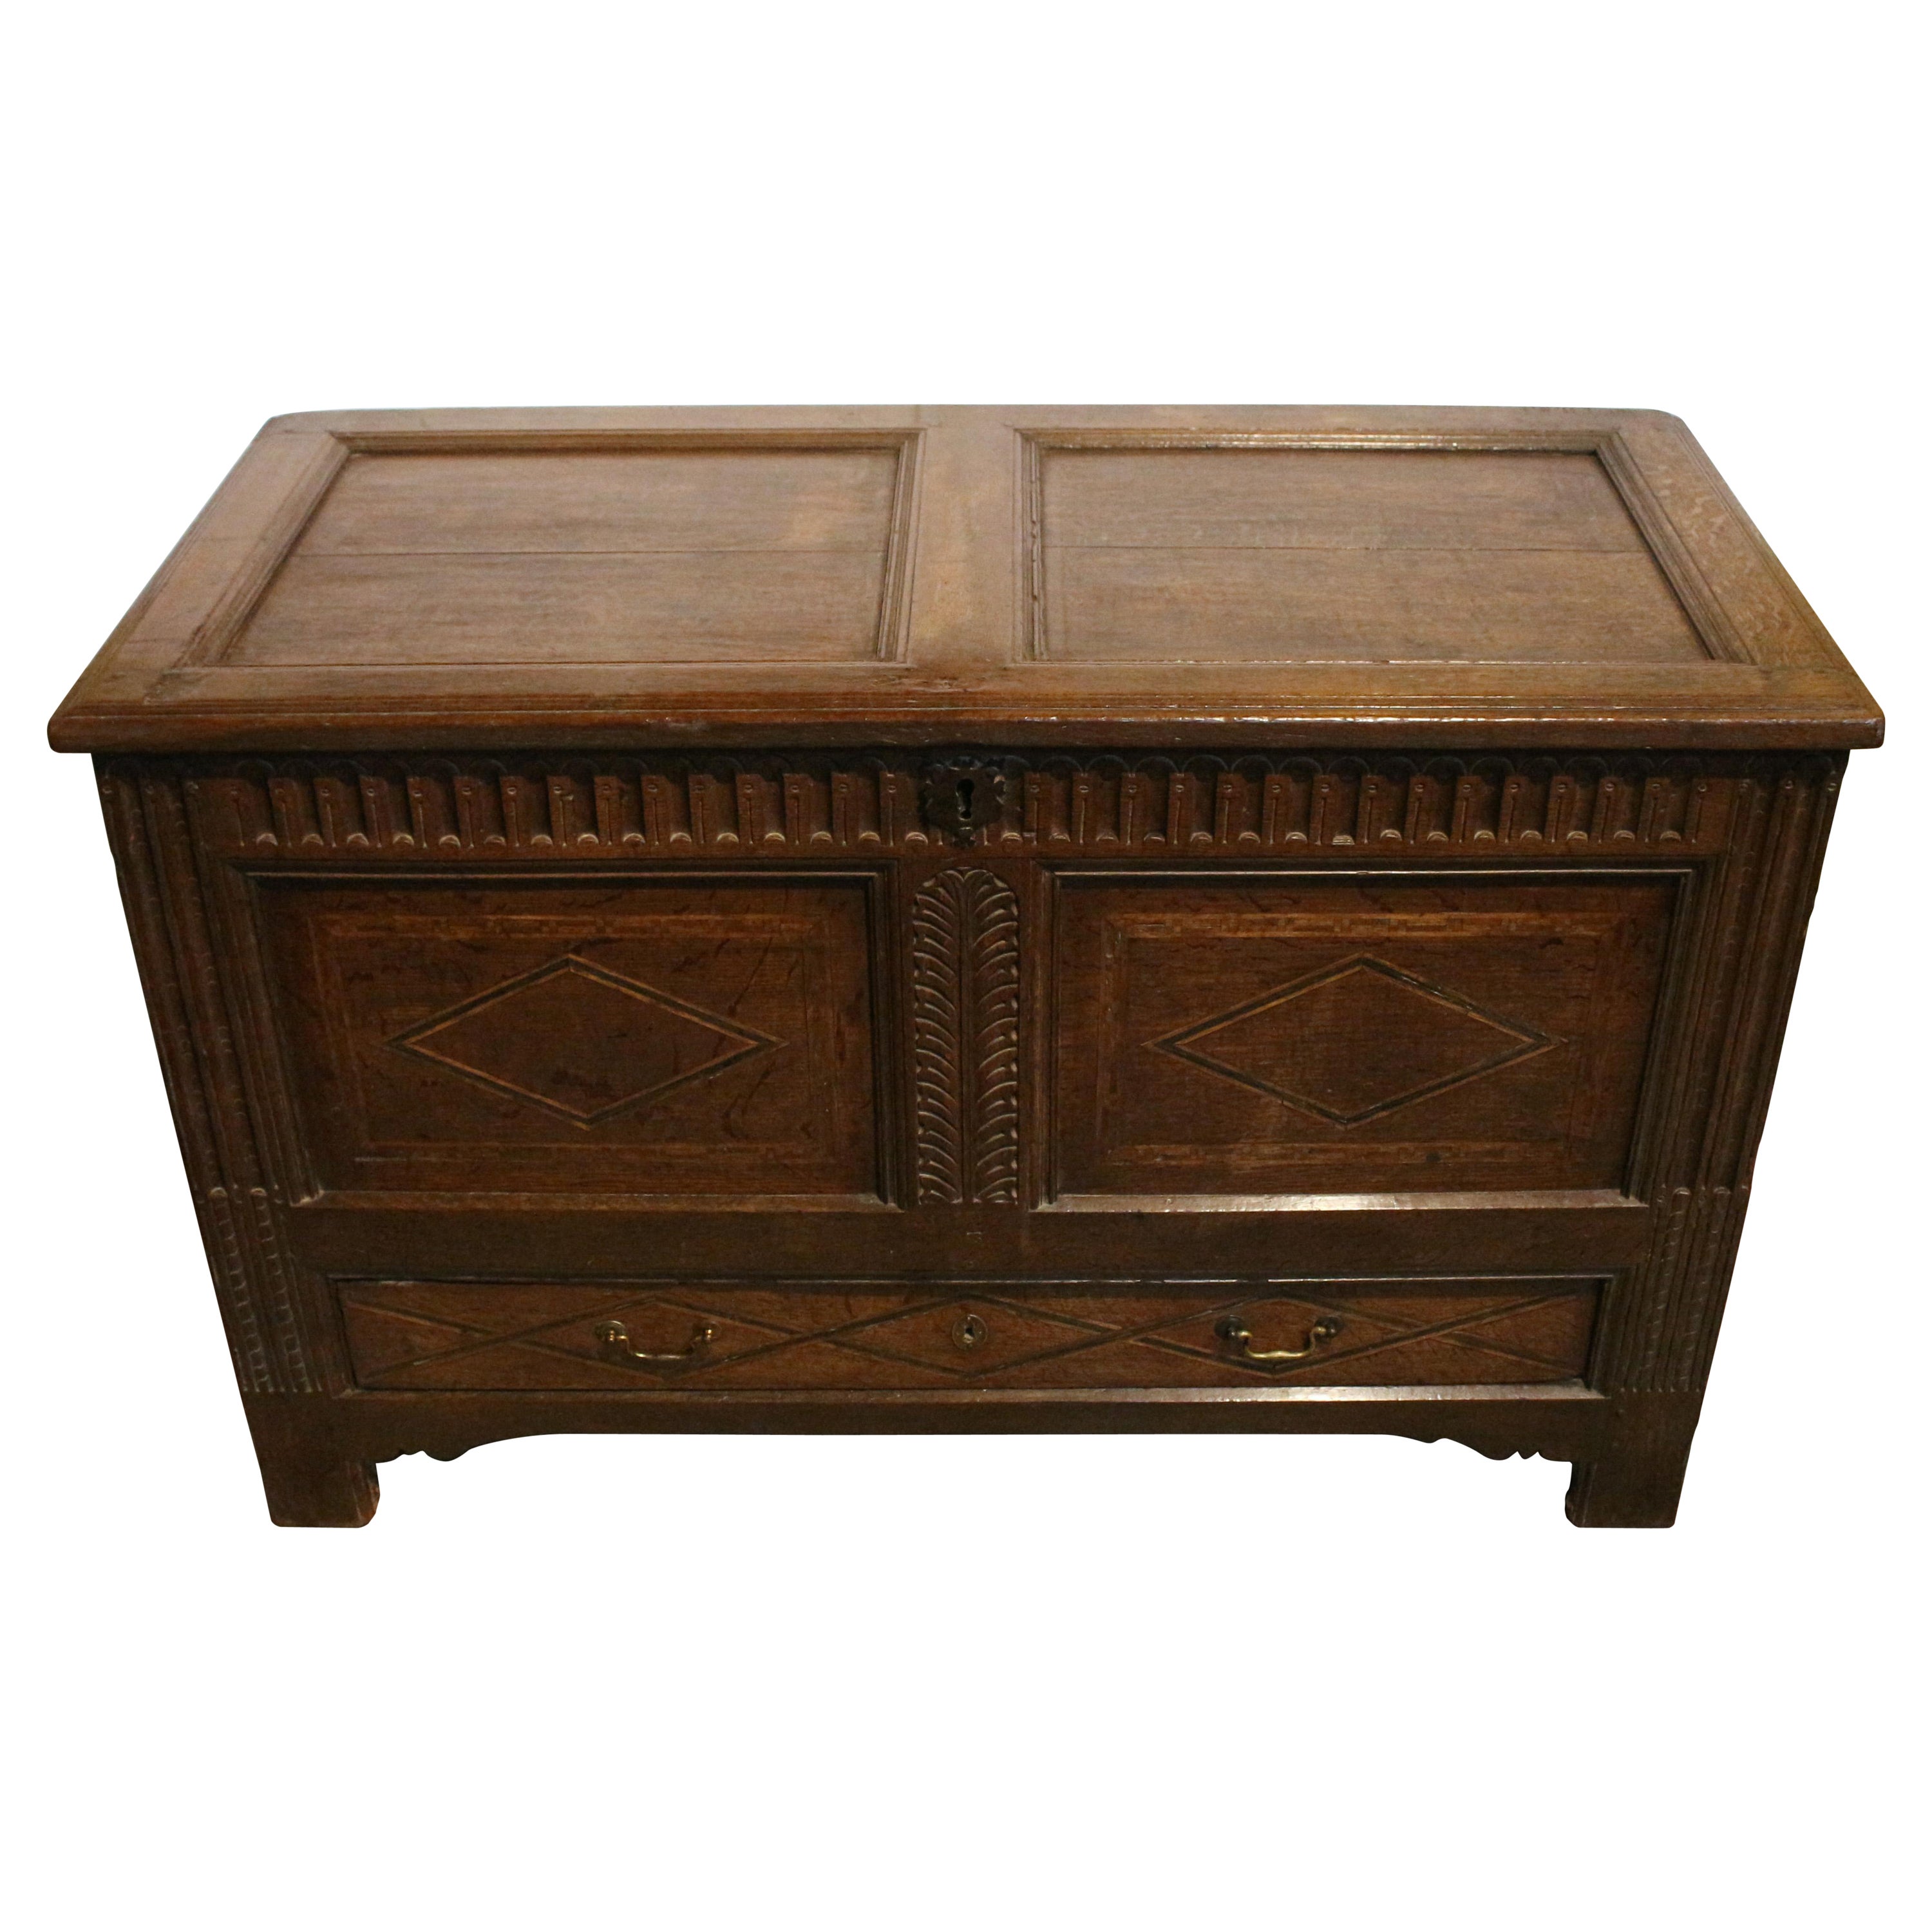 Early 18th Century Inlaid & Carved English Coffer For Sale